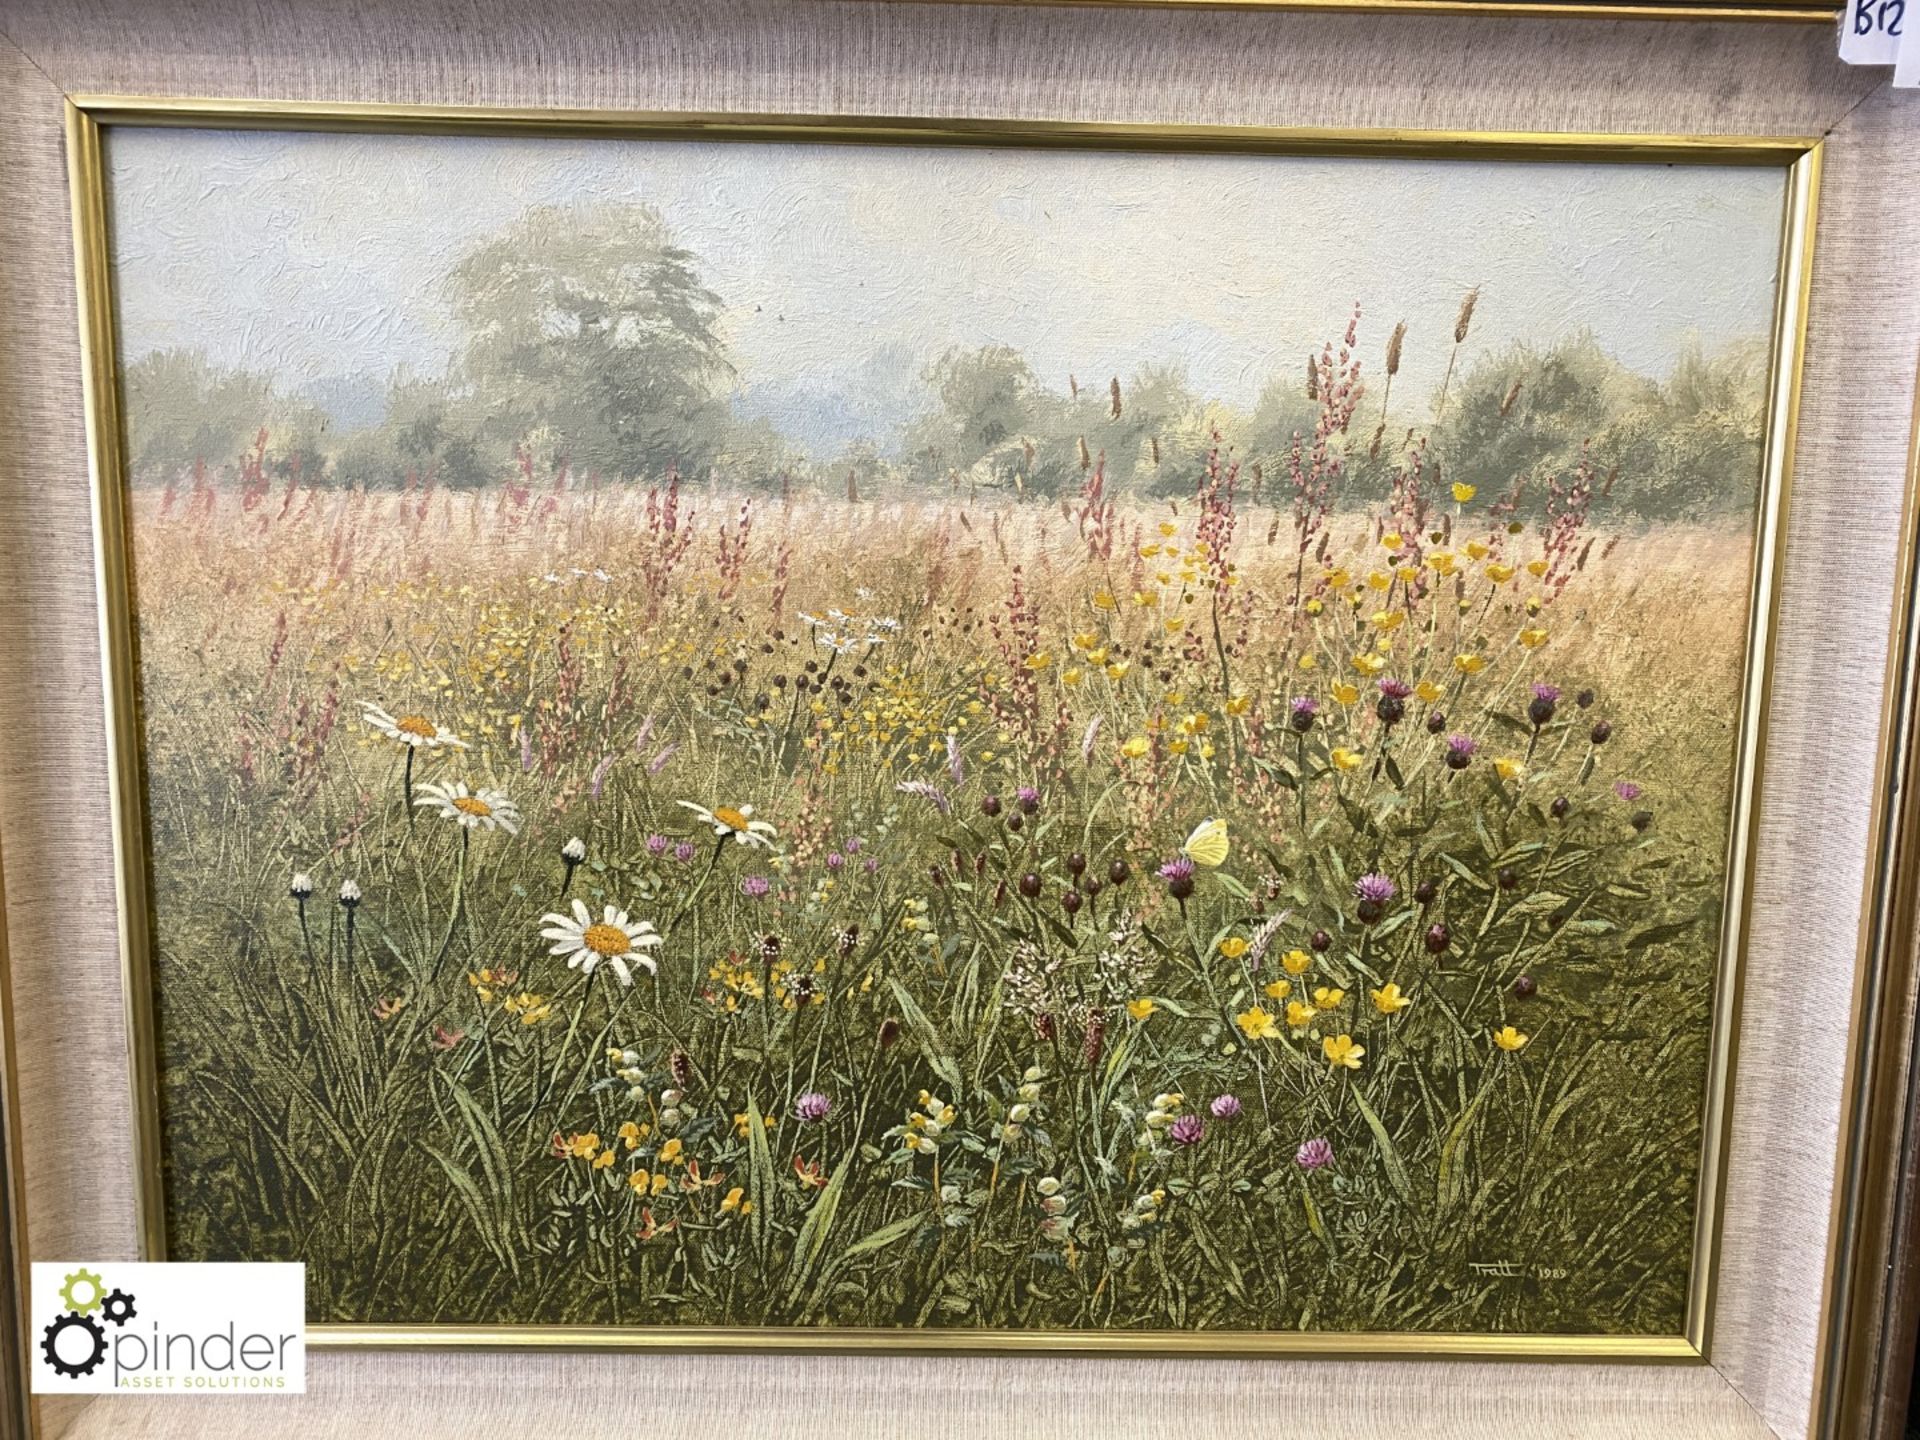 Framed Oil on Canvas “Field of Flowers” by Richard Tratt, 1989, 750mm x 600mm - Image 3 of 4